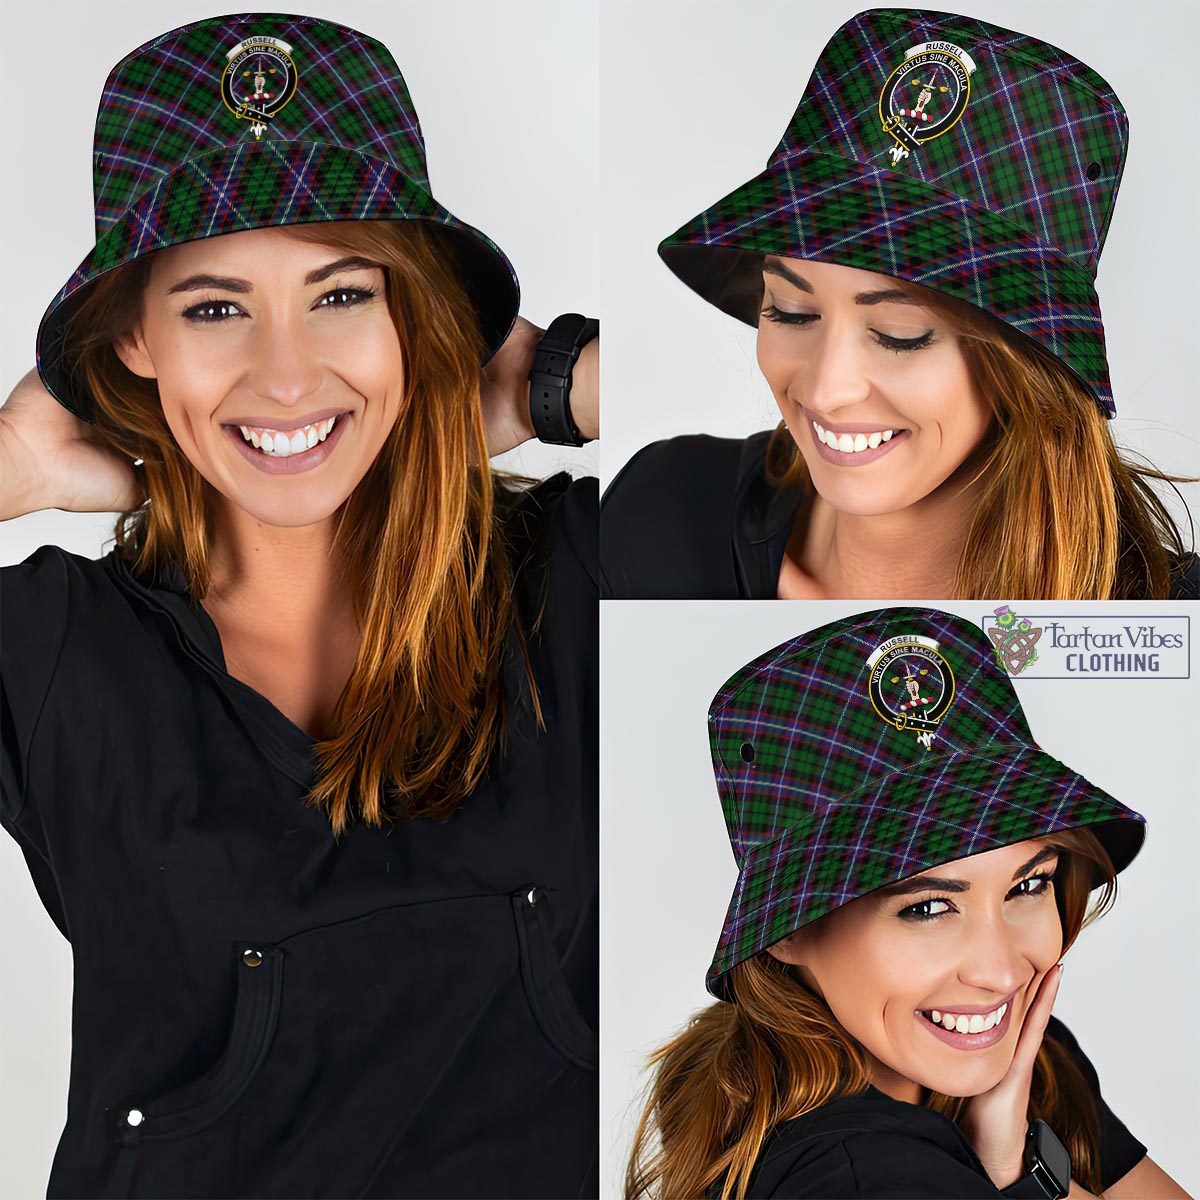 Tartan Vibes Clothing Russell Tartan Bucket Hat with Family Crest